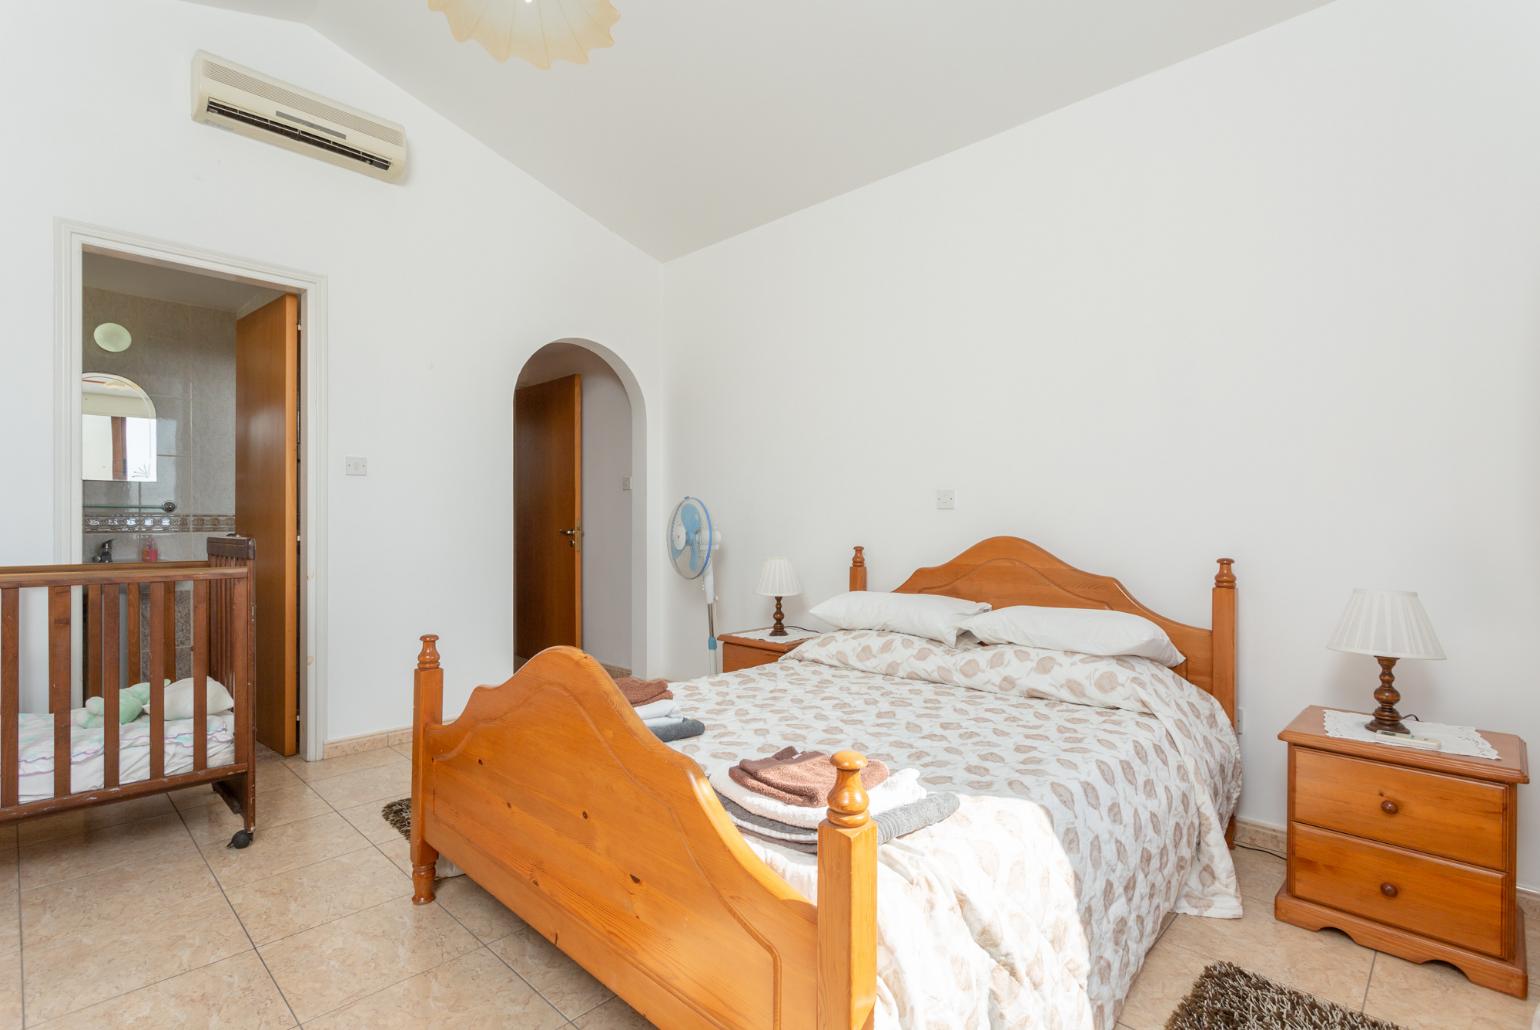 Double bedroom with en suite bathroom, A/C, and upper terrace access with sea views